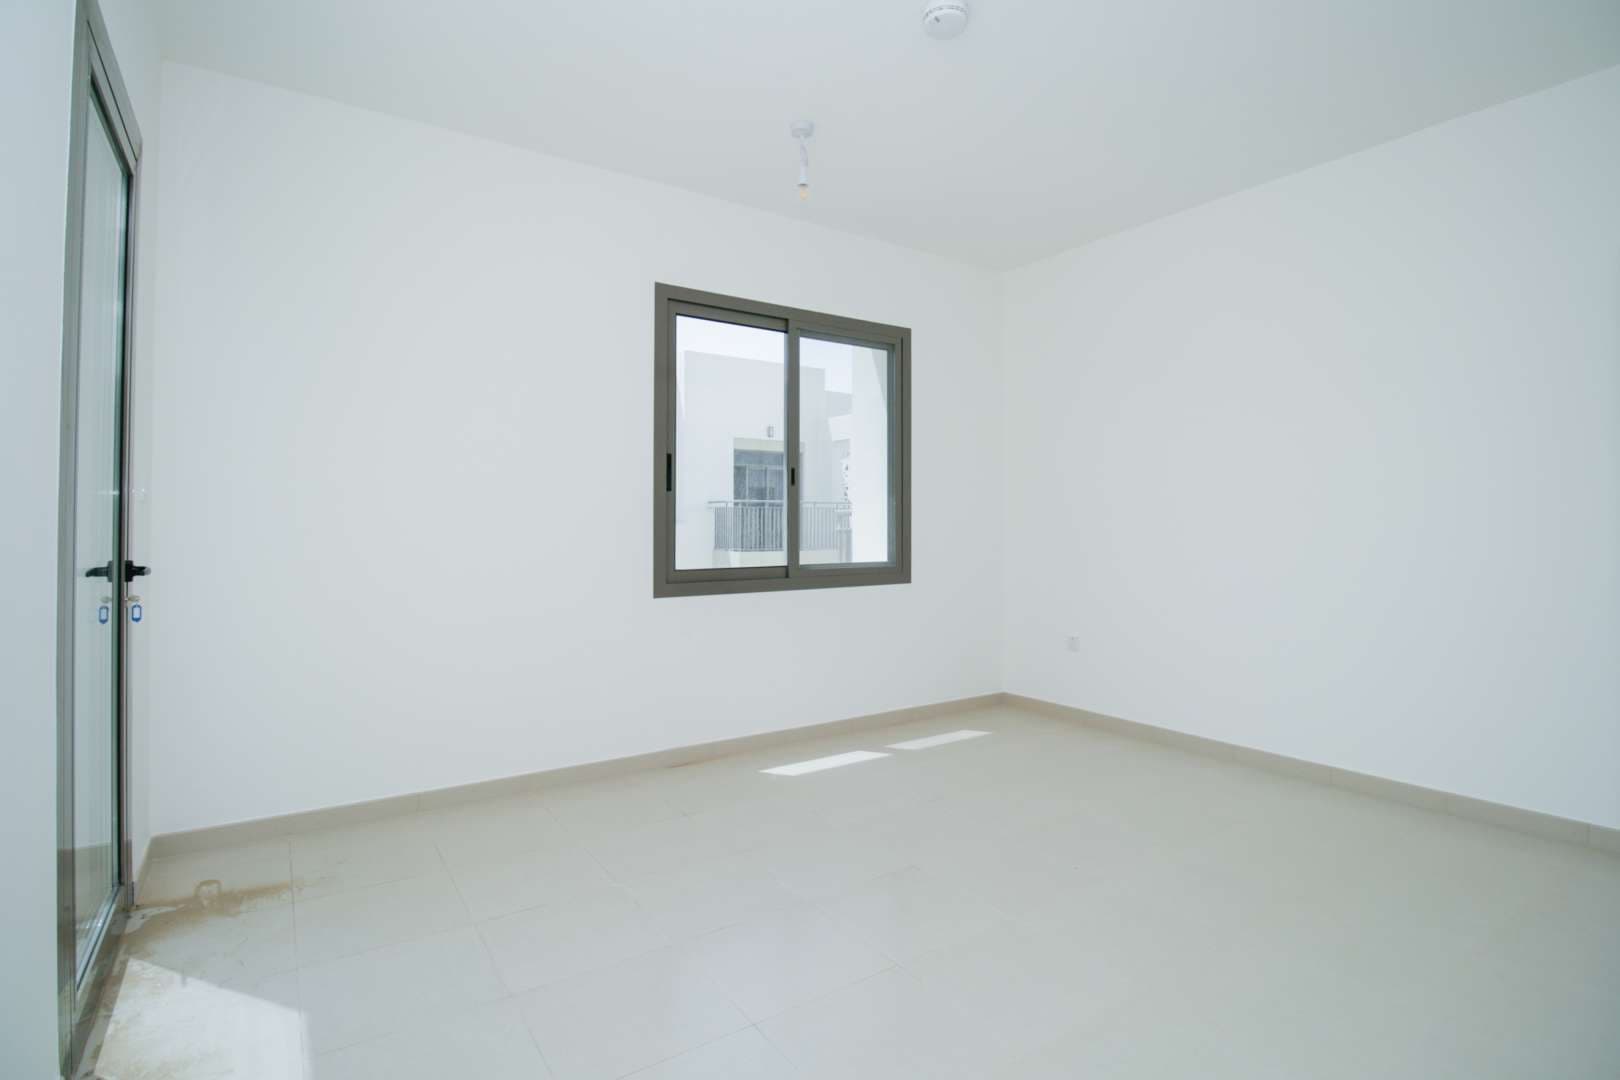 4 Bedroom Townhouse For Rent Zahra Townhouses Lp05569 8683f093e6a2680.jpg